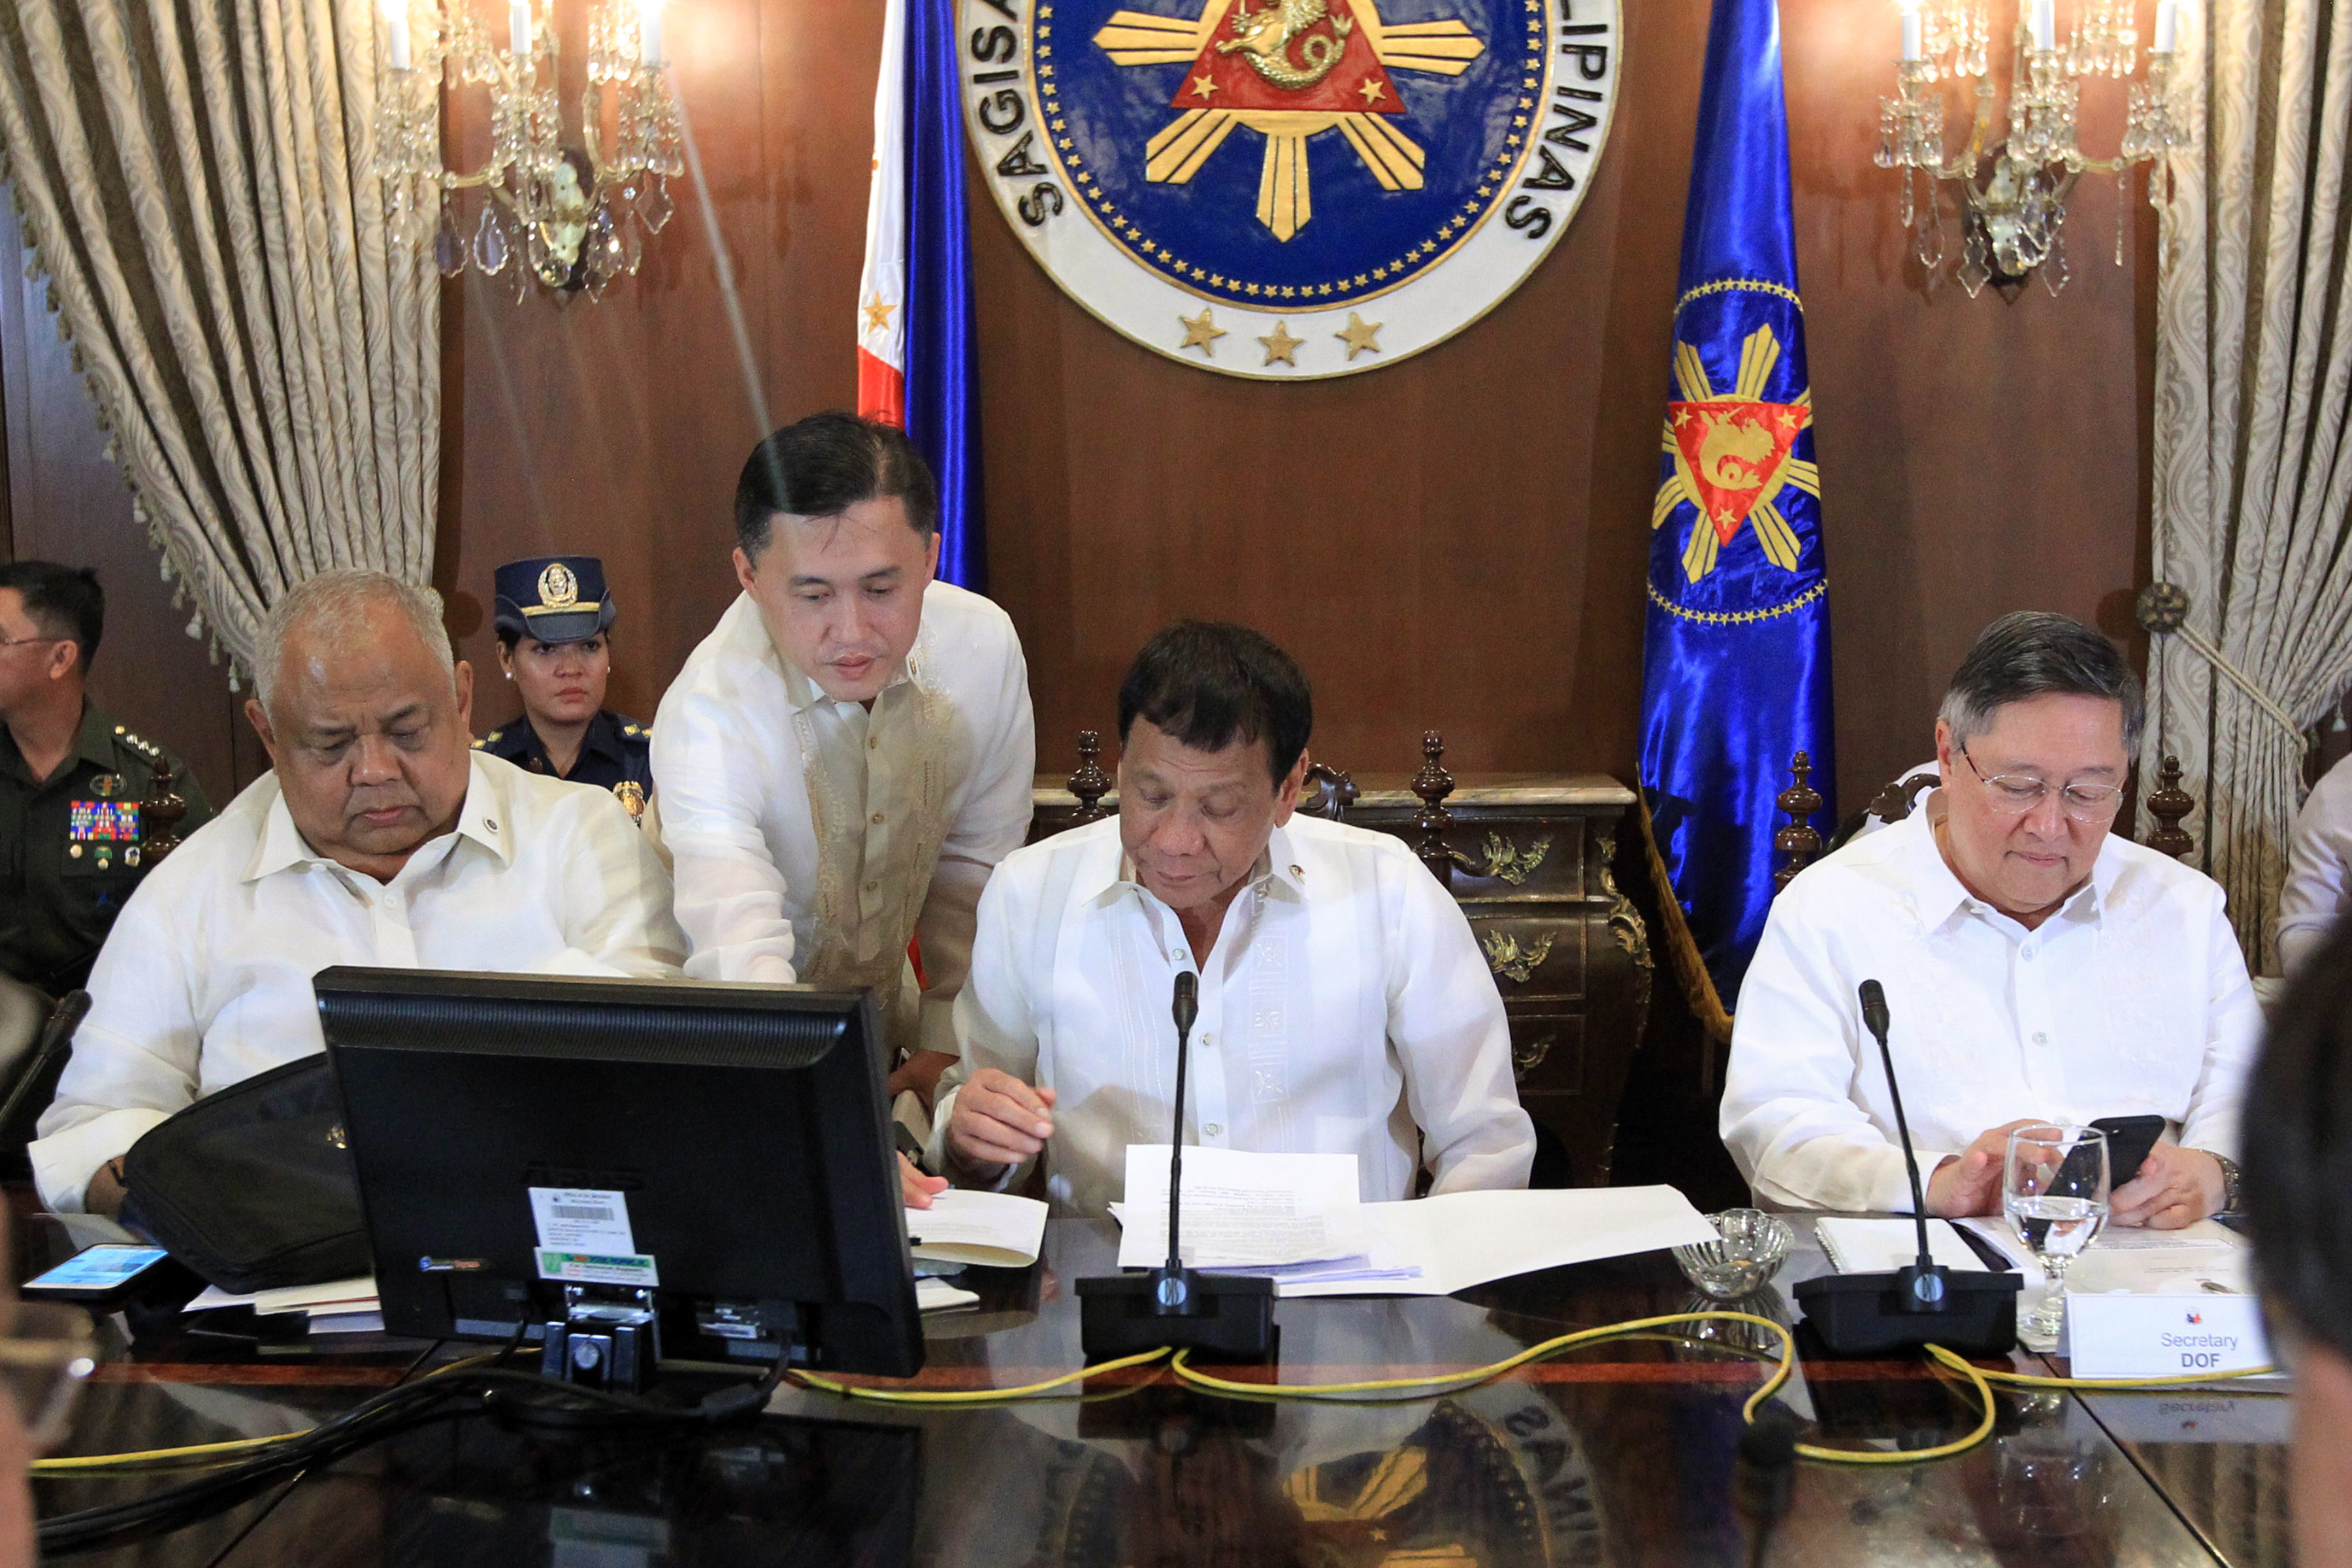 PHILIPPINE CHIEF. President Rodrigo Duterte leads the Cabinet meeting on April 3, 2017. With him are Special Assistant Bong Go, Executive Secretary Salvador Medialdea, and Finance Secretary Carlos Dominguez III. Malacañang file photo 